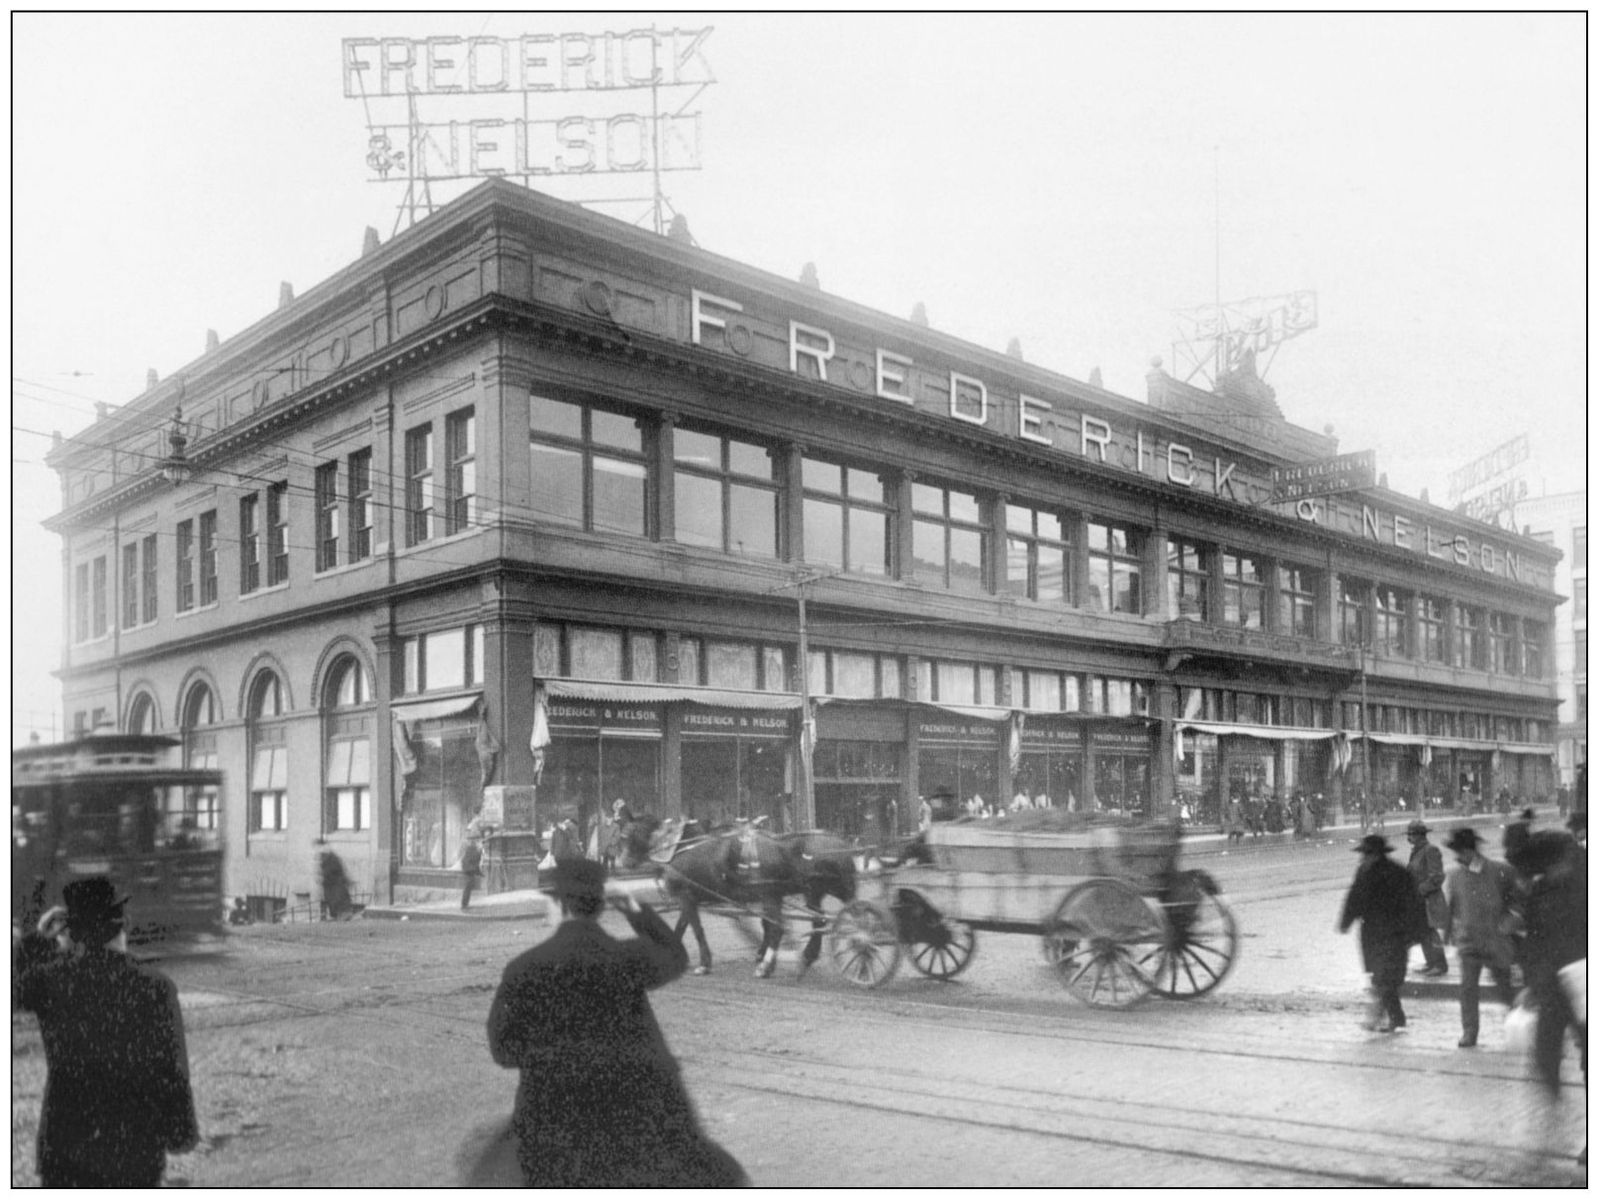 Their second move in 1897 took the store to the Rialto Building on Second - photo 8